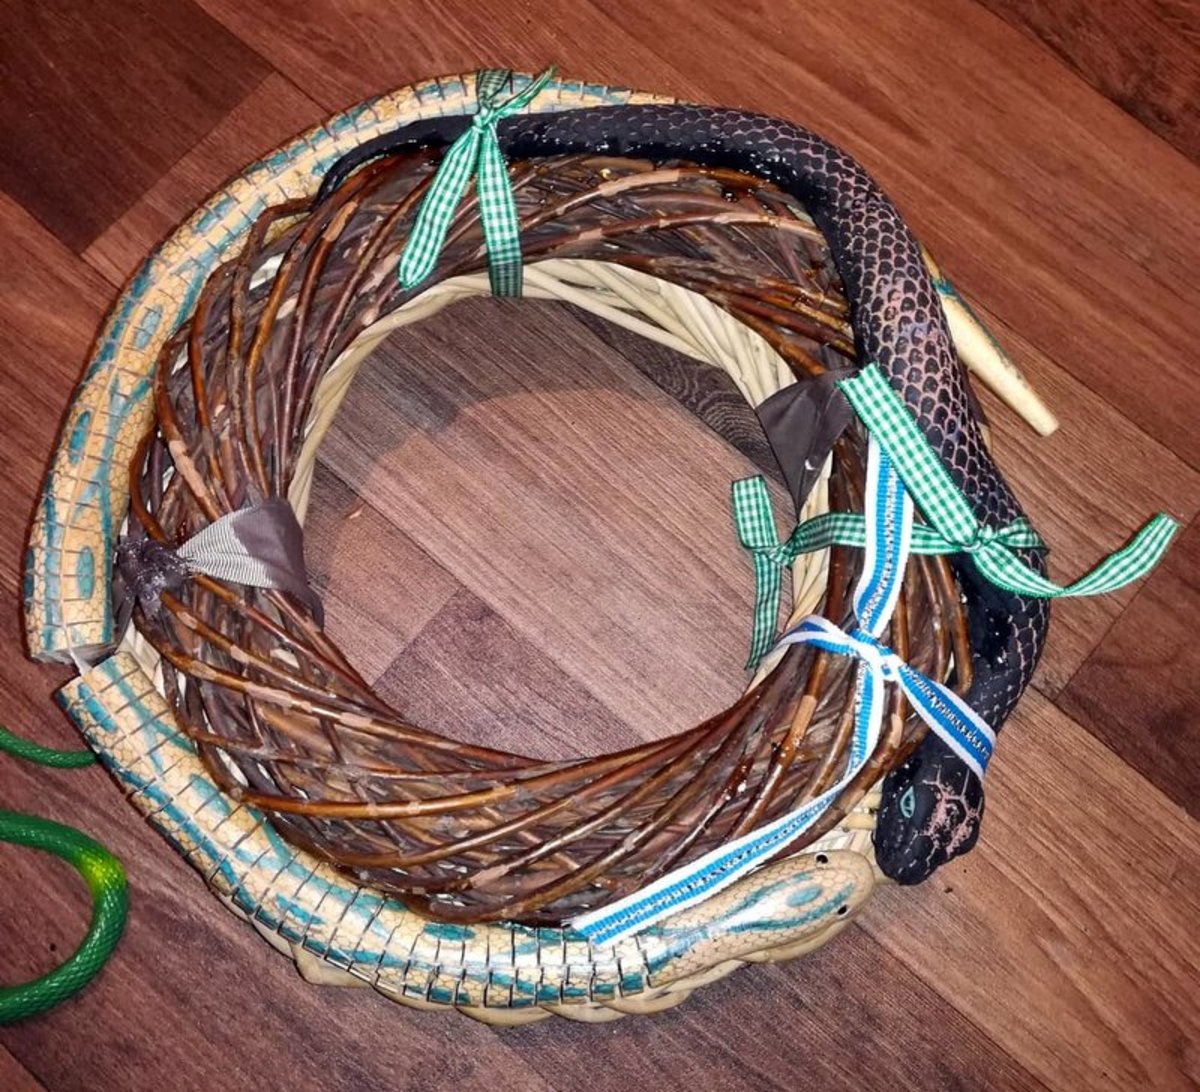 Attach the rubber snakes to the Halloween wreath.